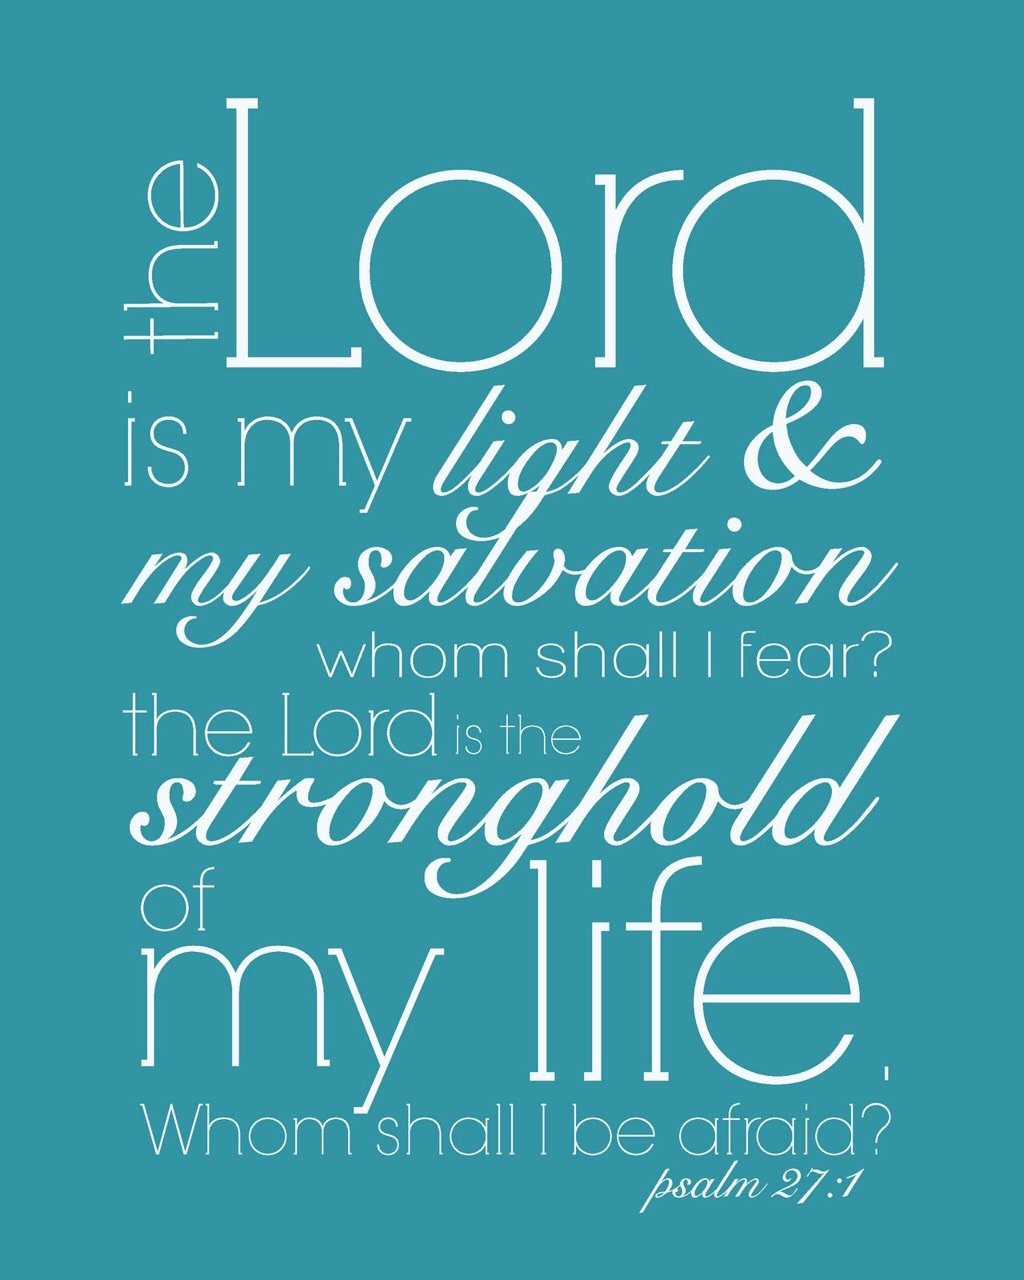 The Lord is my light and salvation